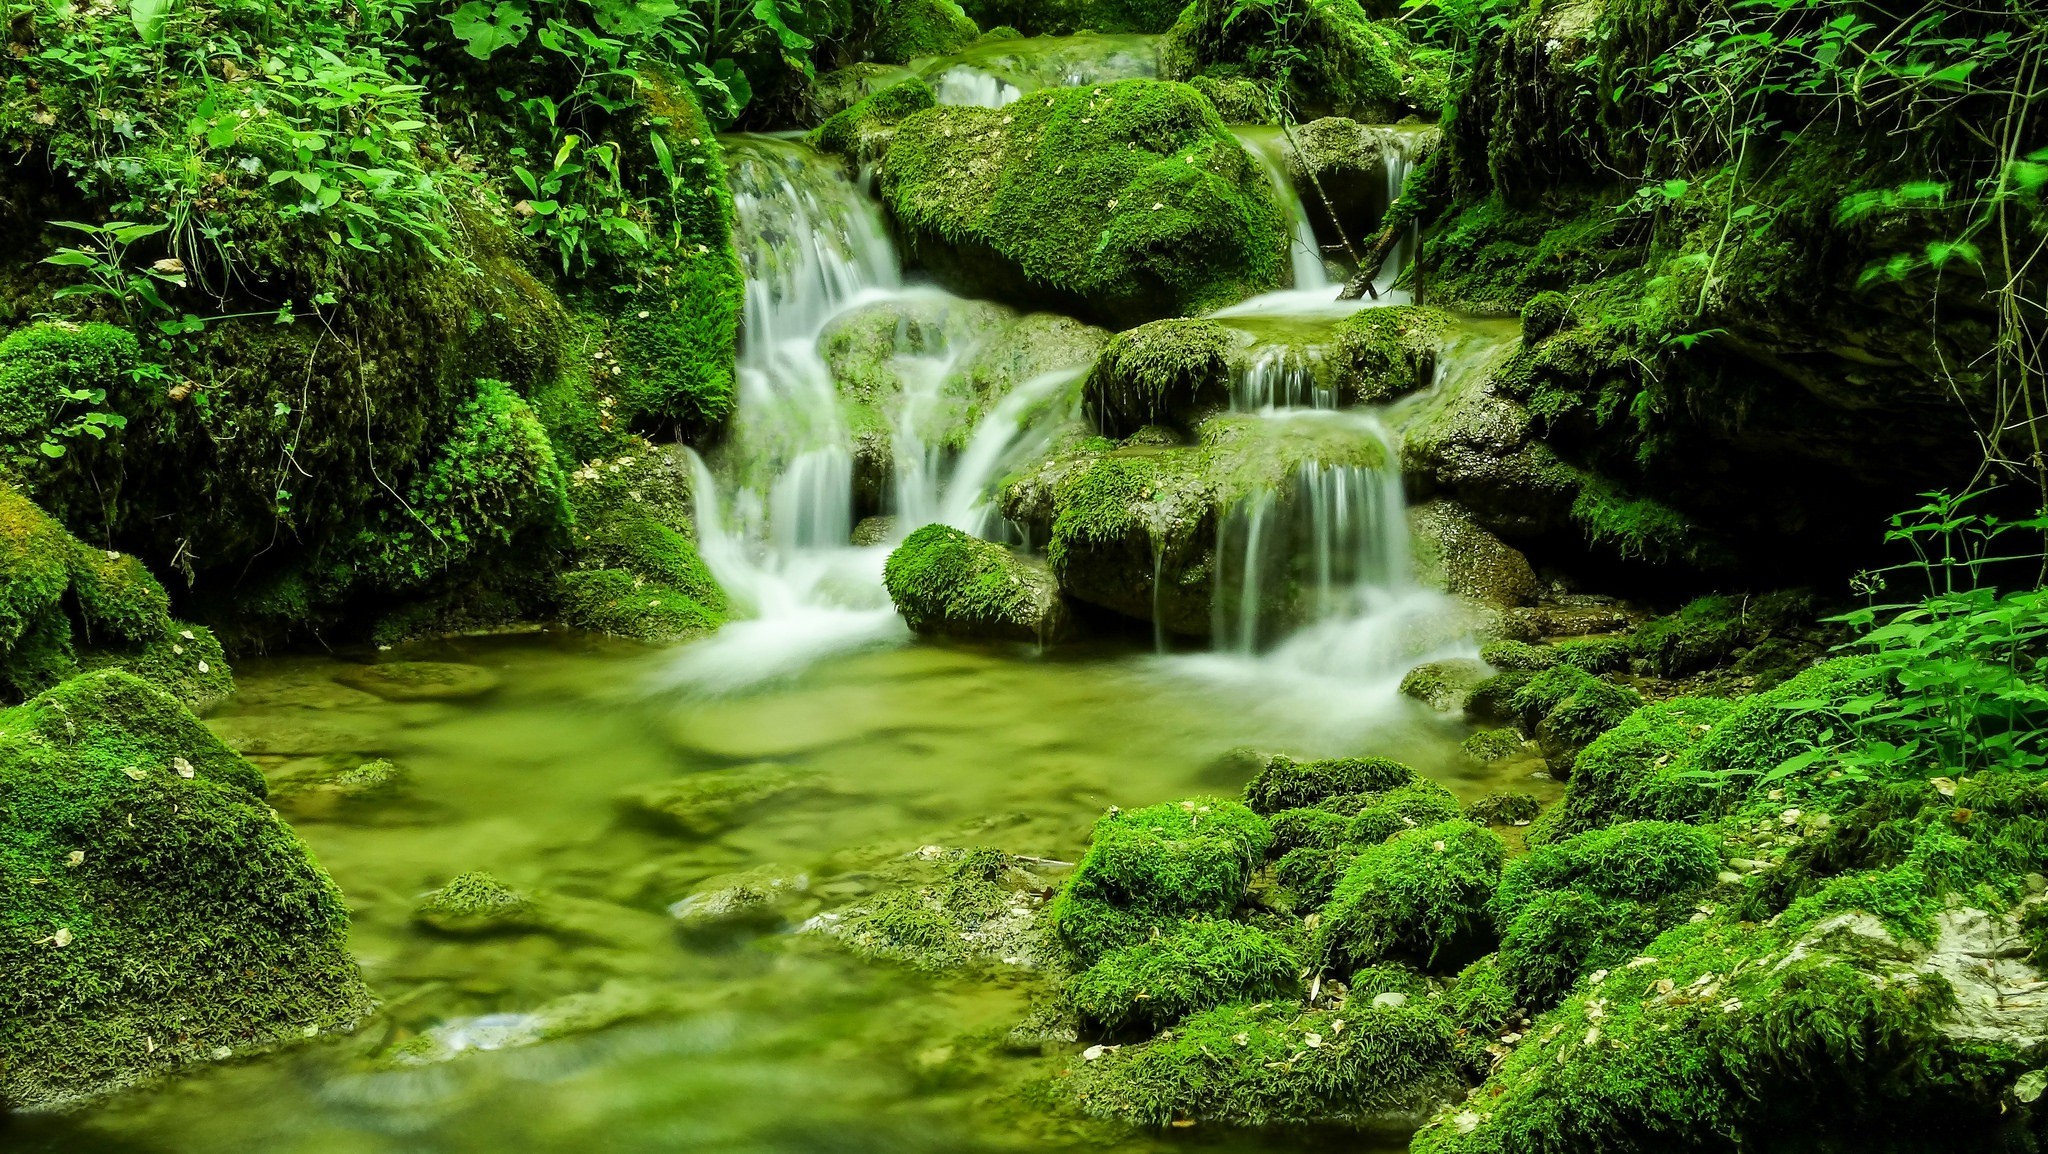 General 2048x1154 forest river nature plants outdoors wet moss